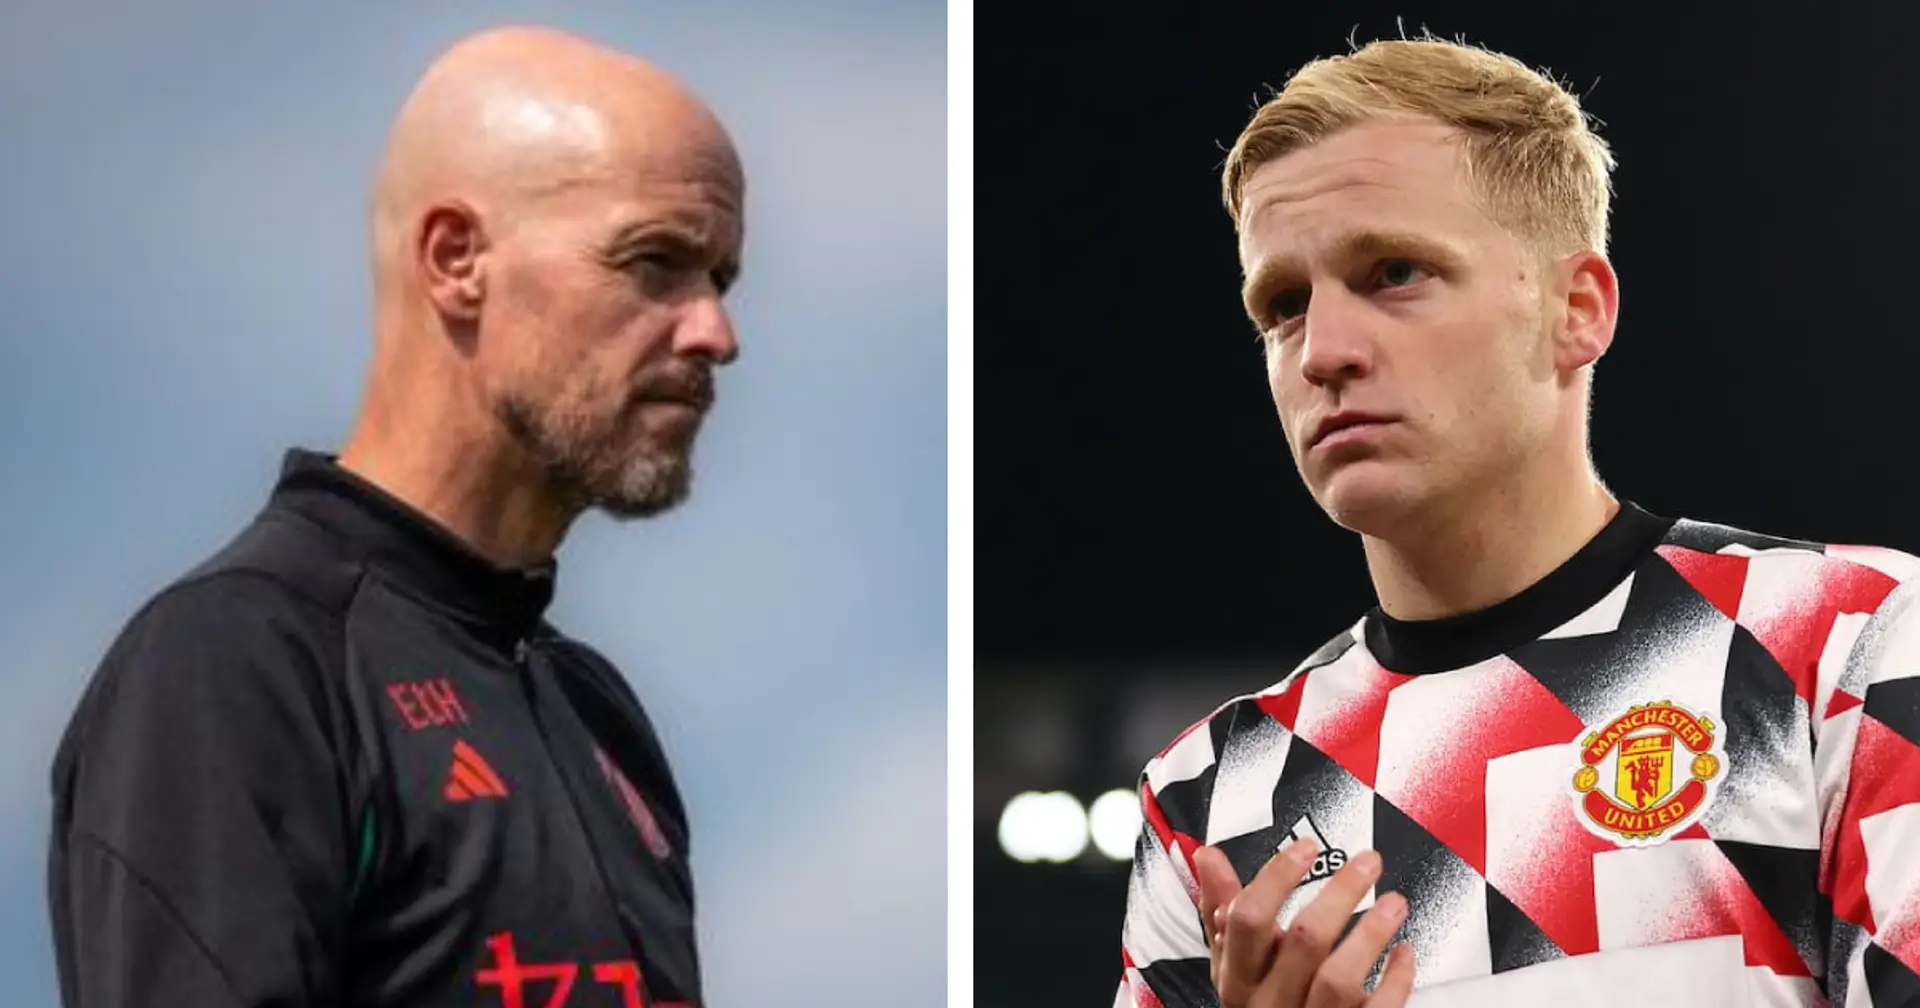 Donny van de Beek 'cleared to leave' Man United, player 'exploring his options' (reliability: 3 stars)